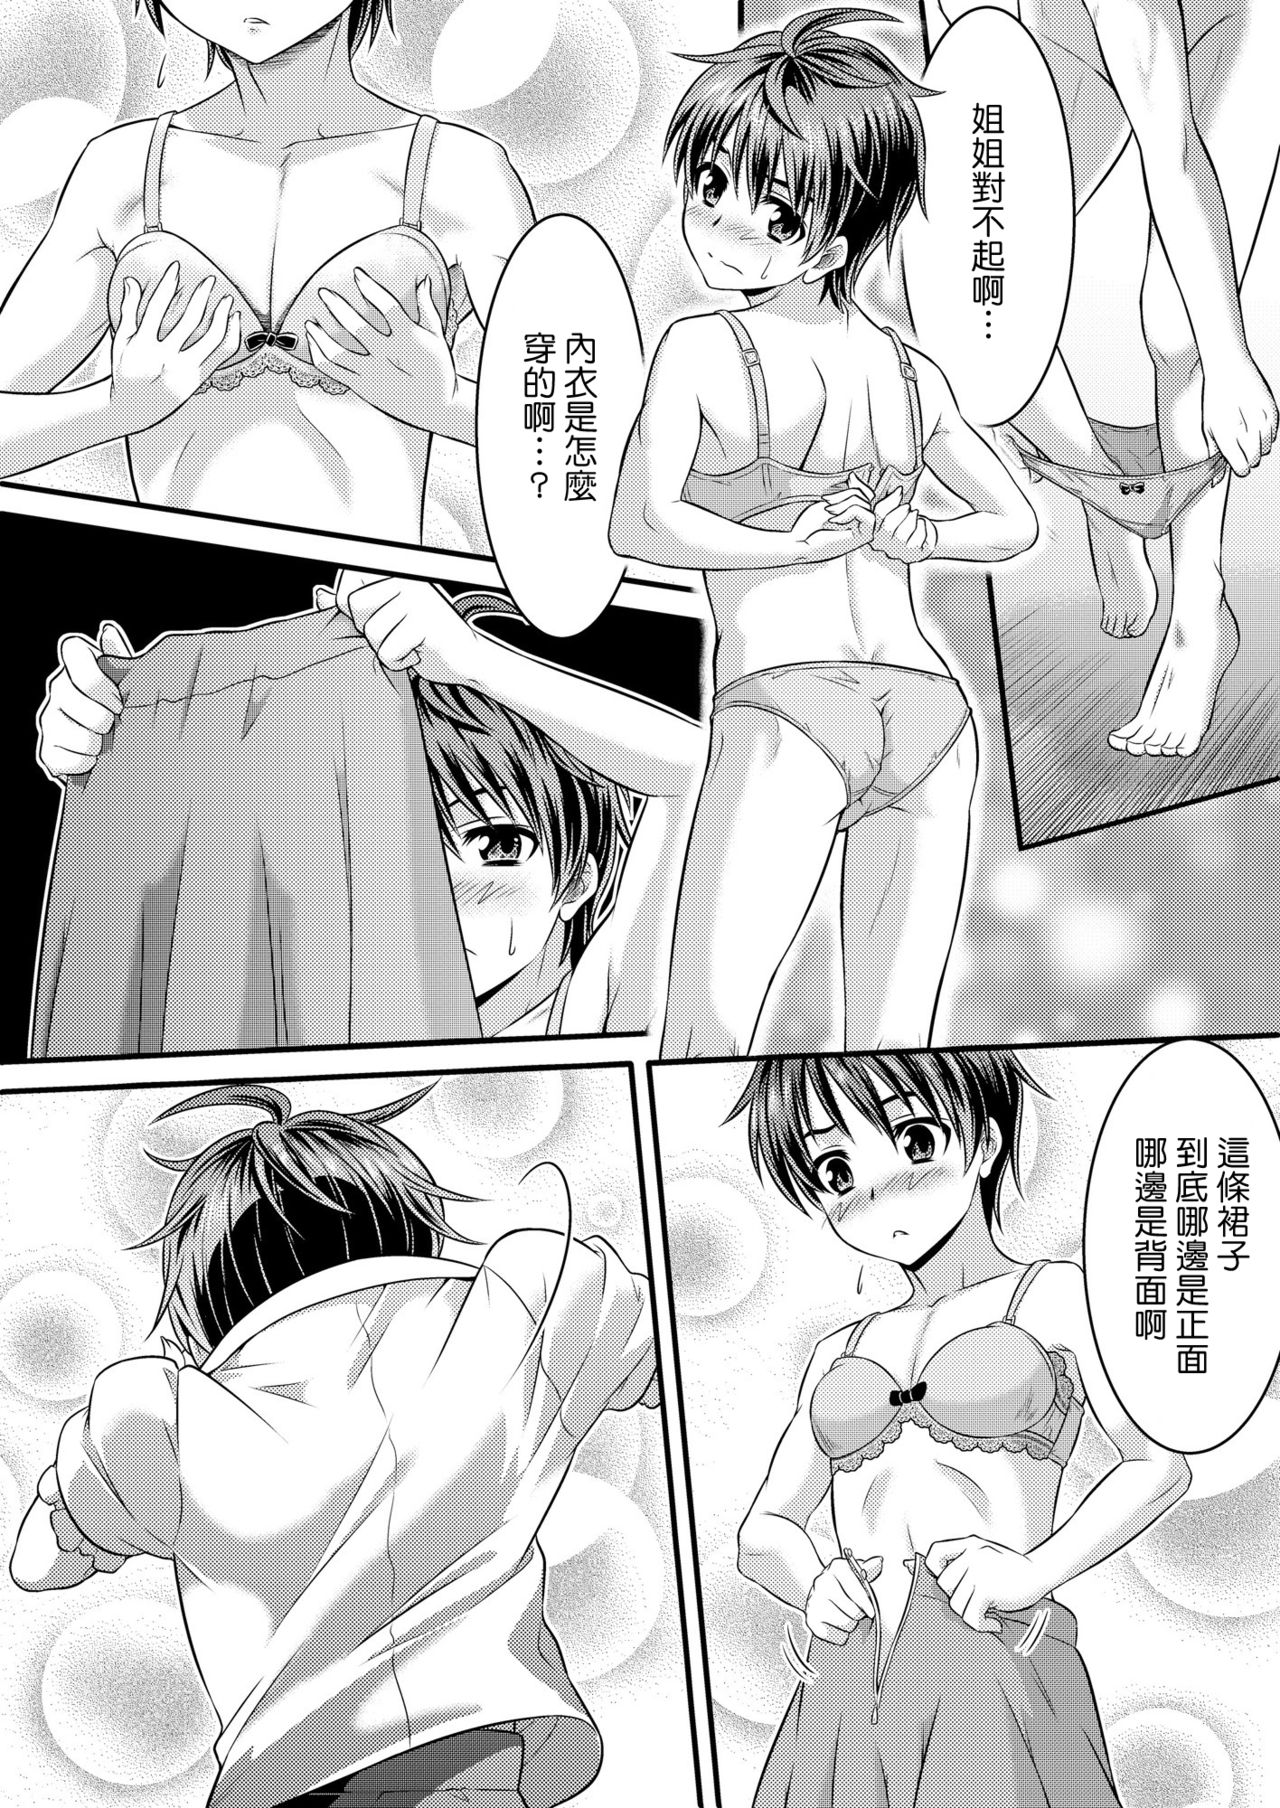 Metamorph ★ Coordination - I Become Whatever Girl I Crossdress As~ [Sister Arc, Classmate Arc] [Chinese] [瑞树汉化组] page 5 full